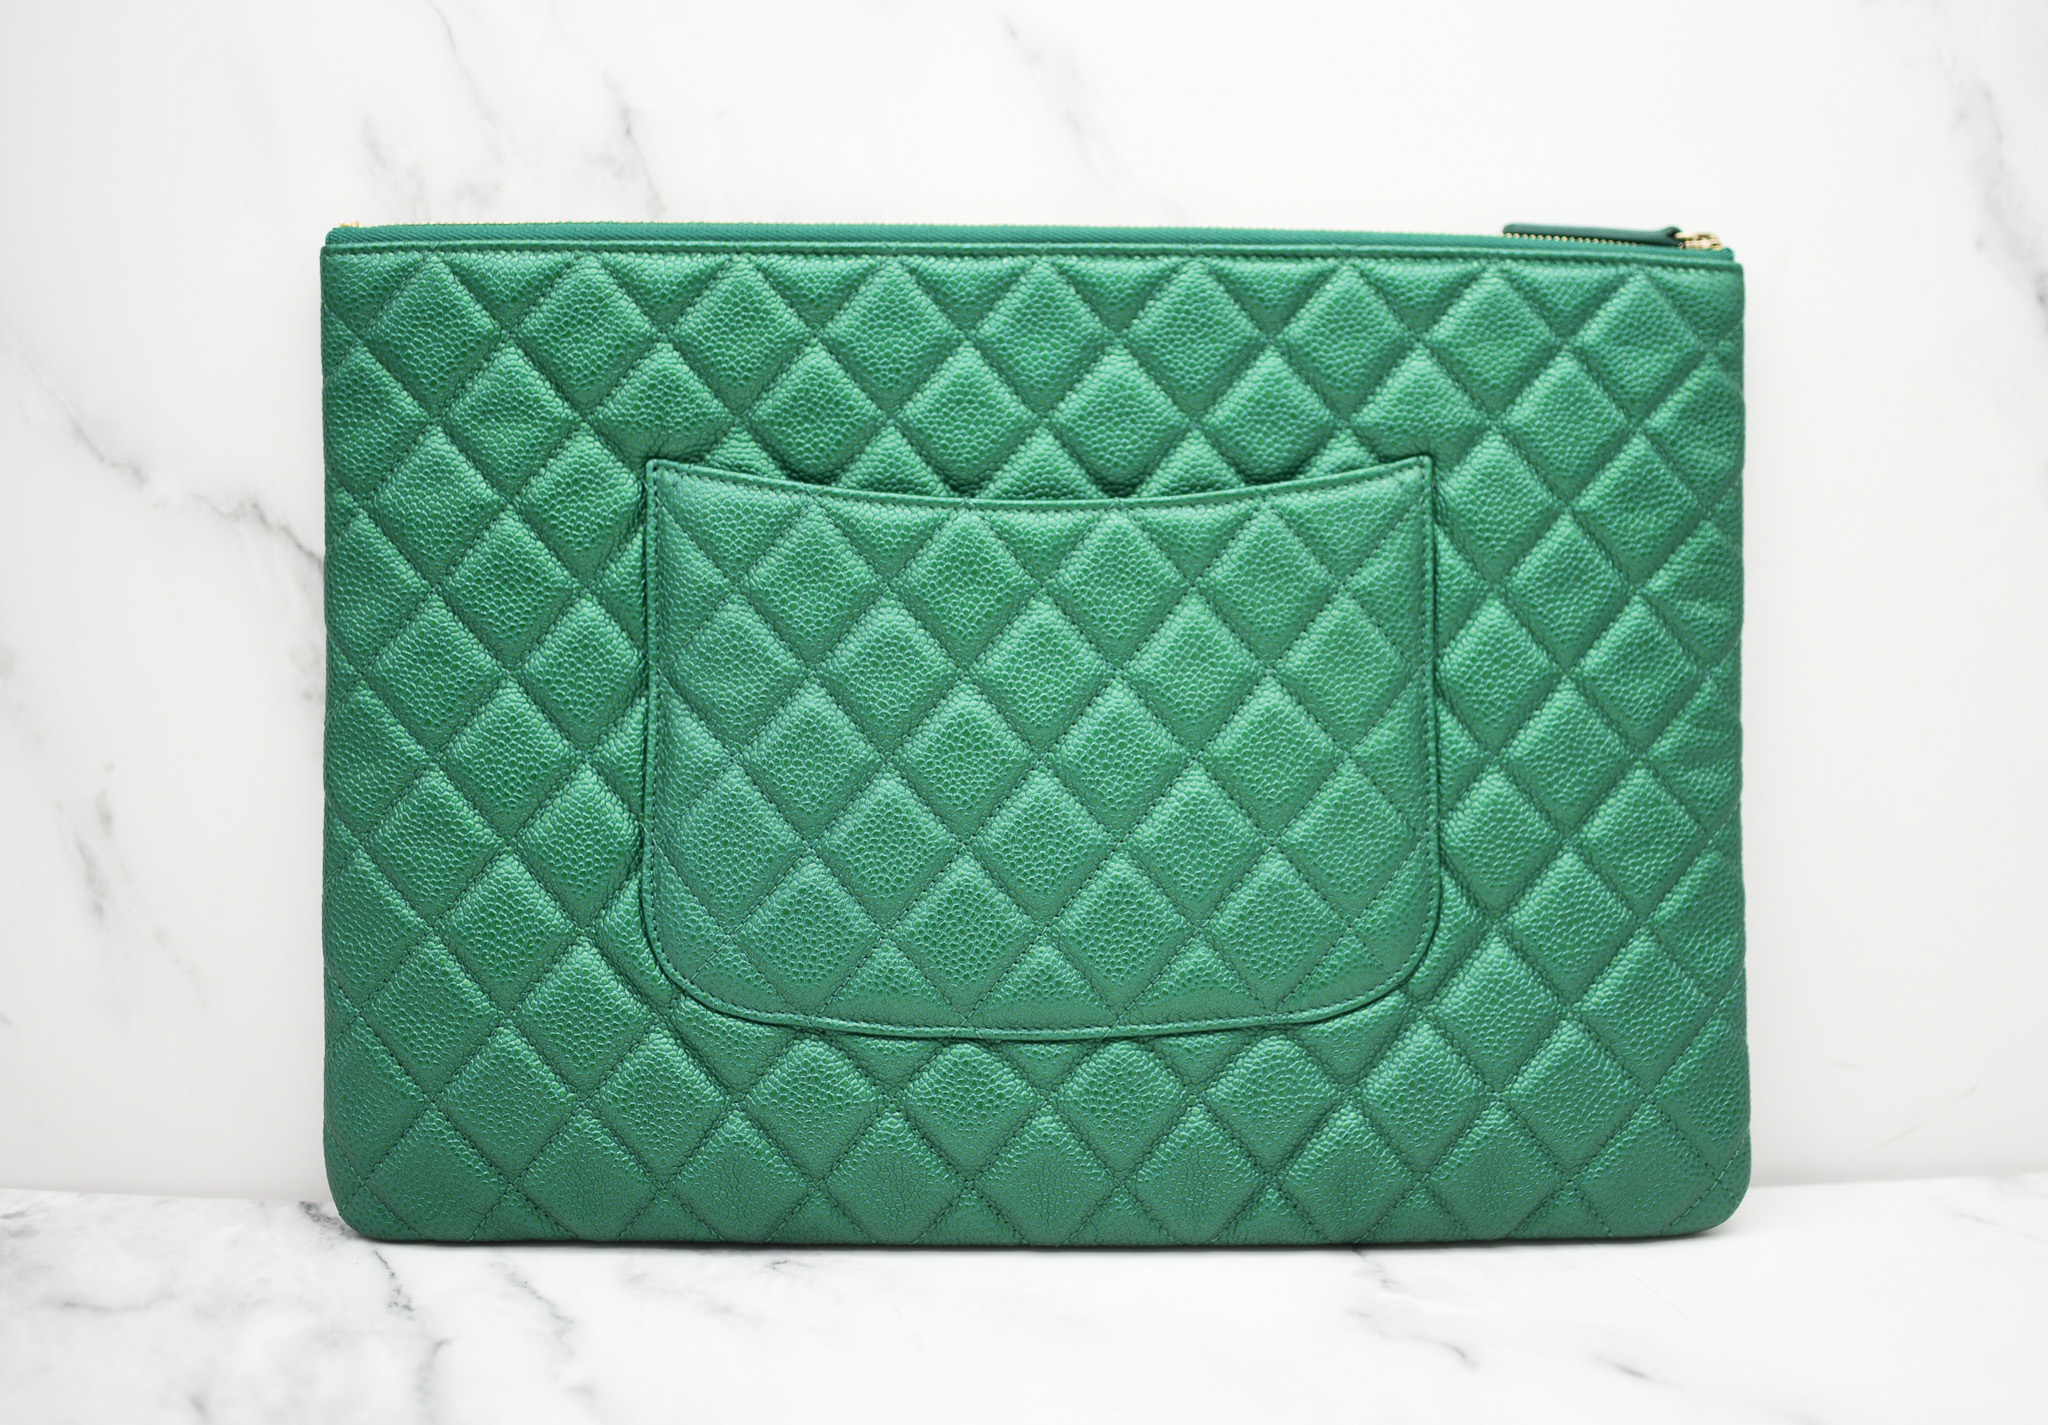 Chanel Large O Case, 18S Emerald Green Caviar Leather, Gold